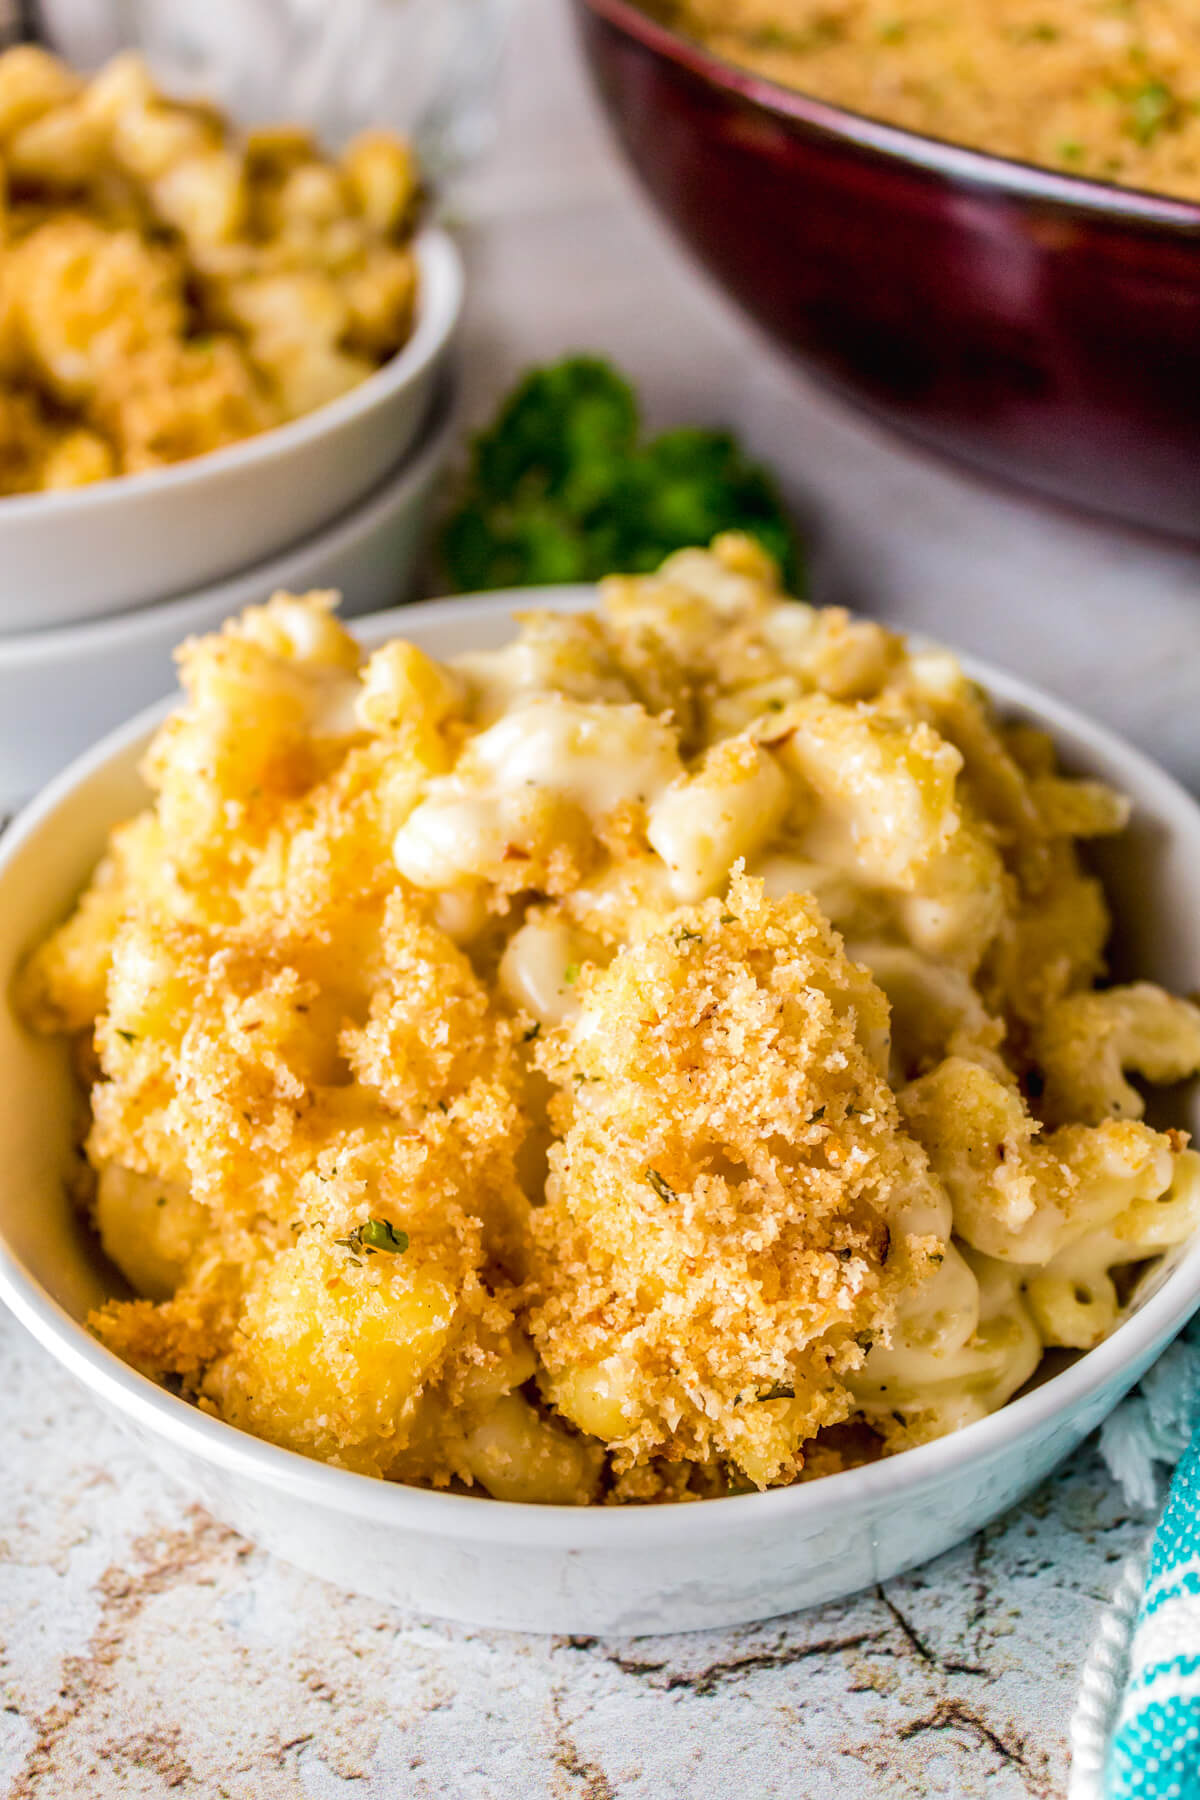 A bowl of creamy Smoked Mac and Cheese topped with toasted golden bread crumbs.